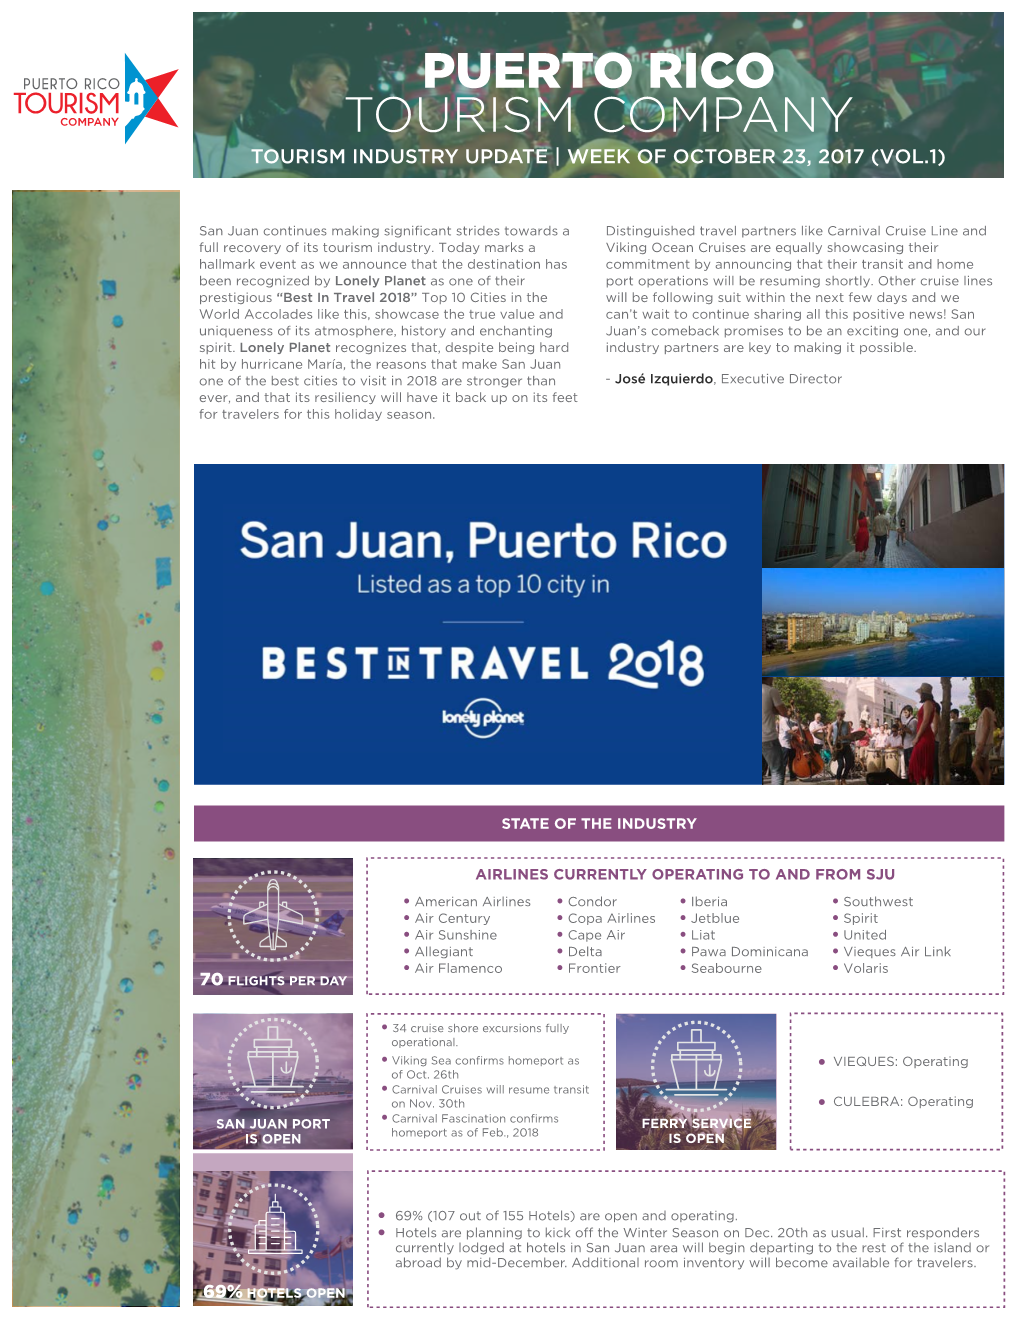 Puerto Rico Tourism Company Tourism Industry Update | Week of October 23, 2017 (Vol.1)